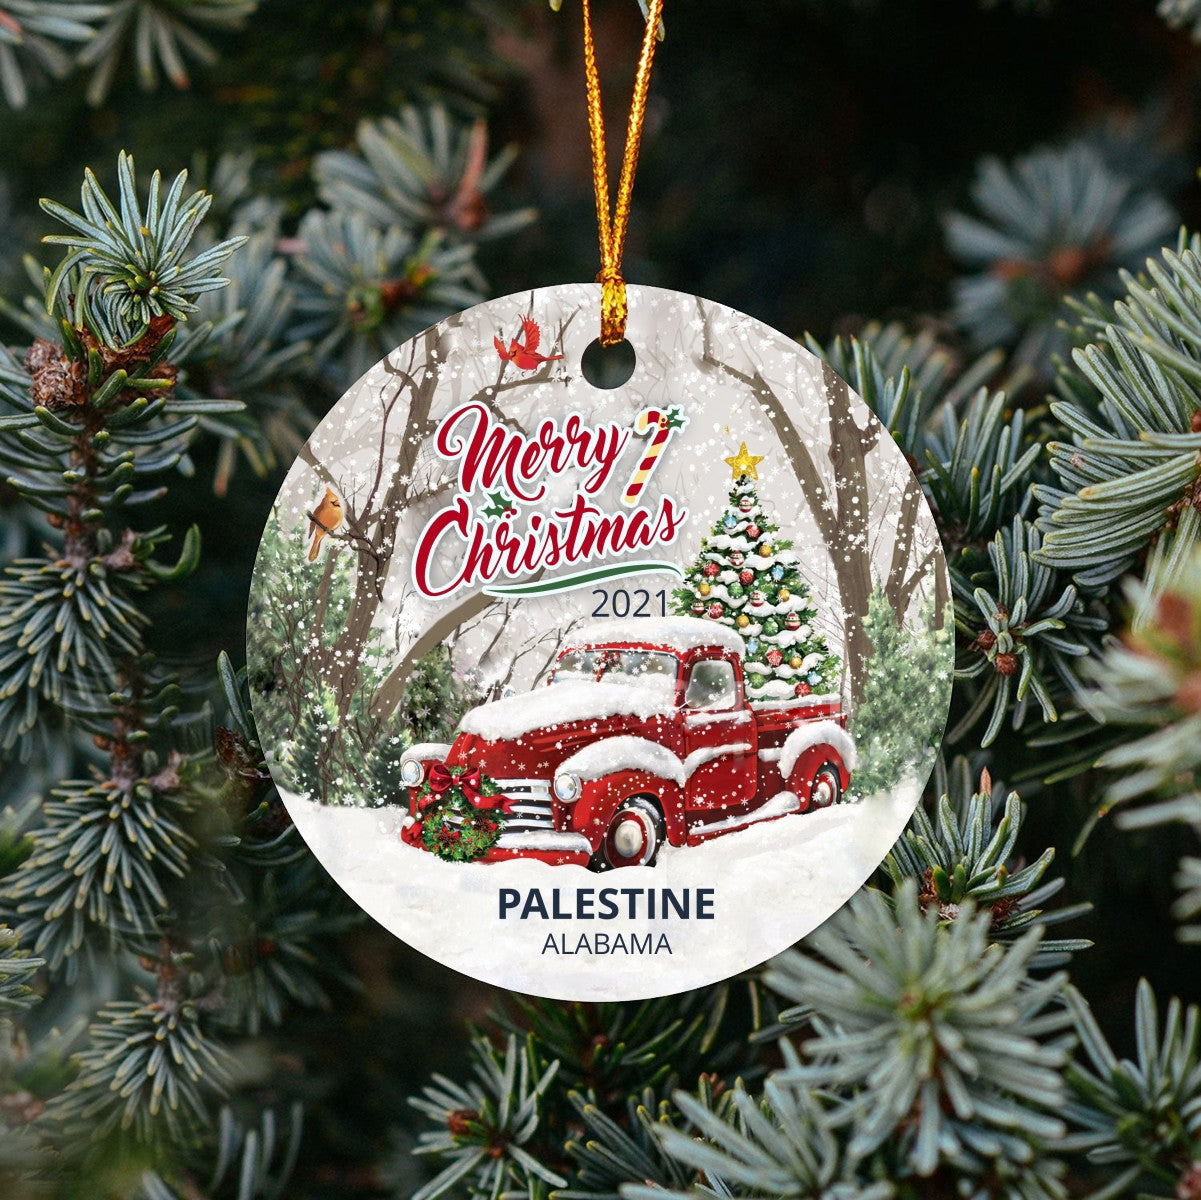 Christmas Tree Ornaments Palestine - Ornament With Name City, State Palestine Alabama AL Ornament - Red Truck Xmas Ornaments 3'' Plastic Gift For Family, Friend And Housewarming